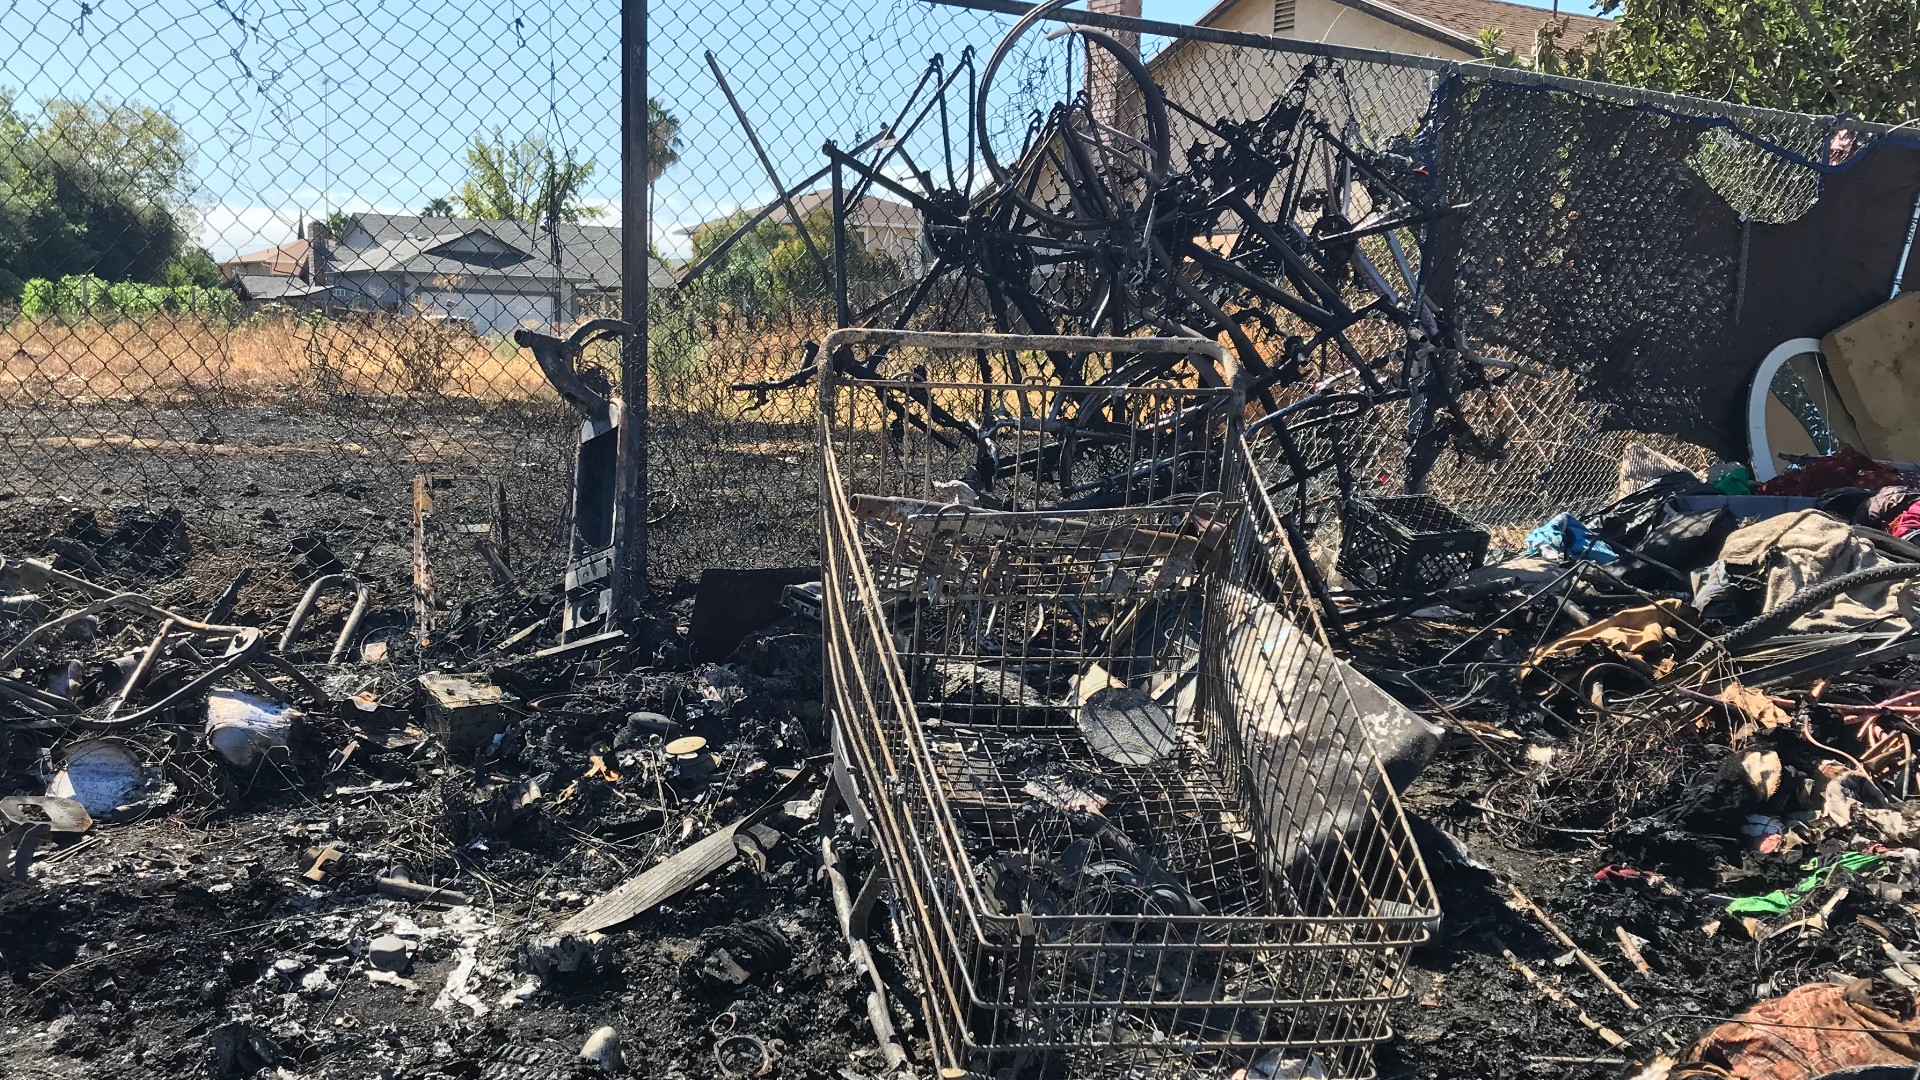 Neighbors in the Lemon Hill neighborhood are speaking out after a fire tore through a homeless encampment, just feet from a home on Pradera Mesa Drive.